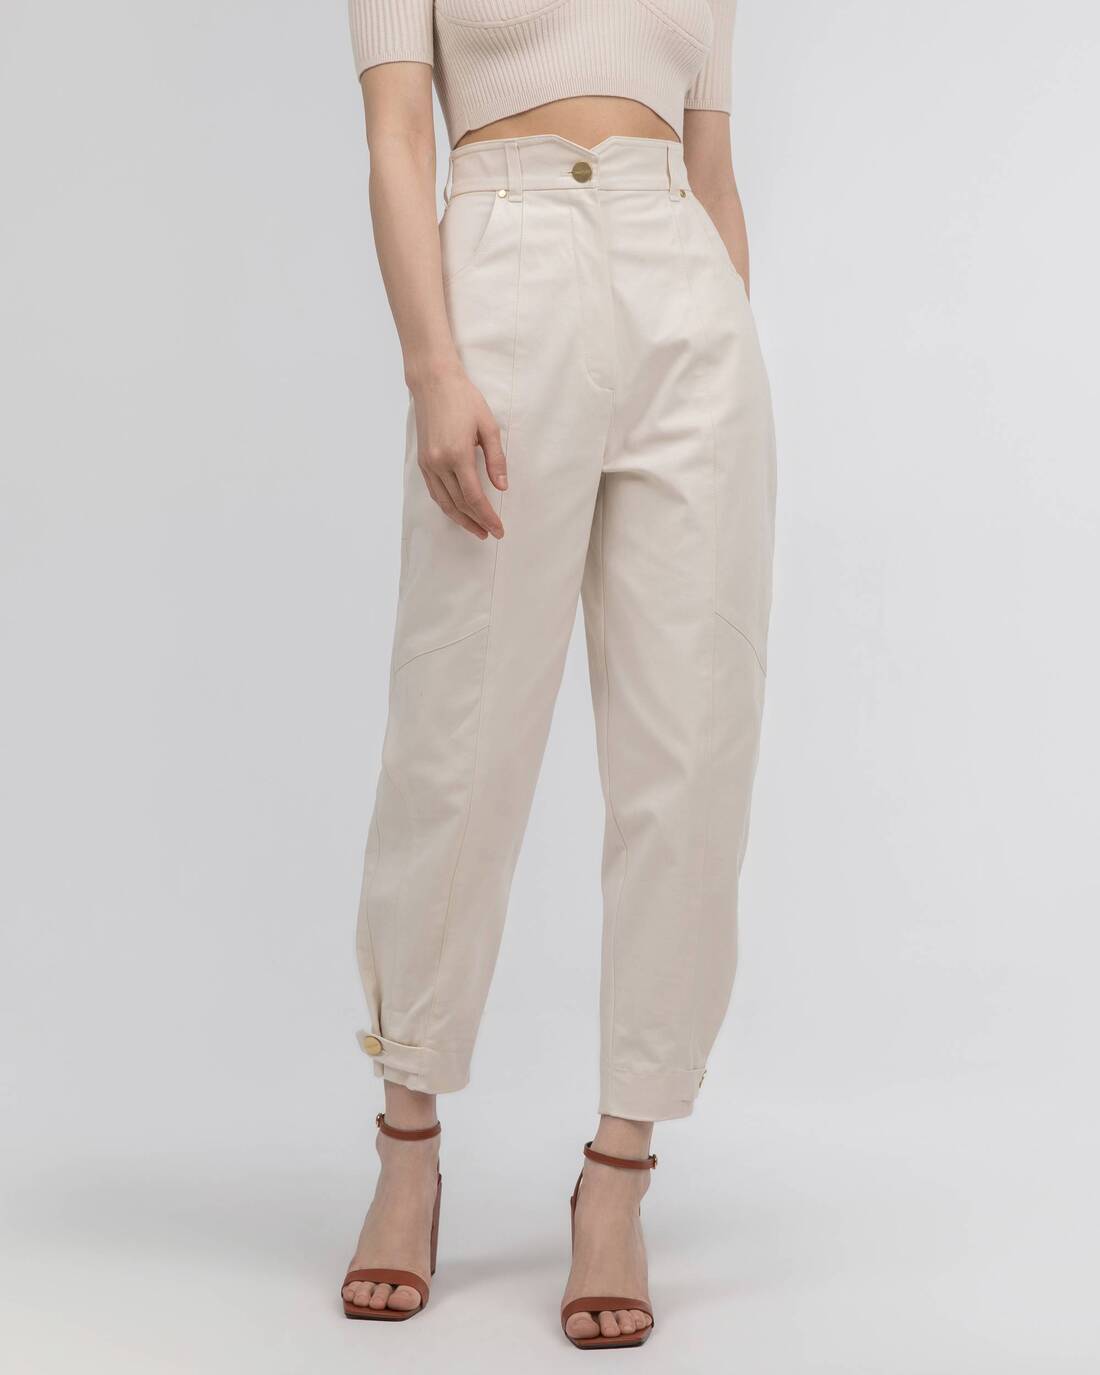 Twill pants with relief detailing